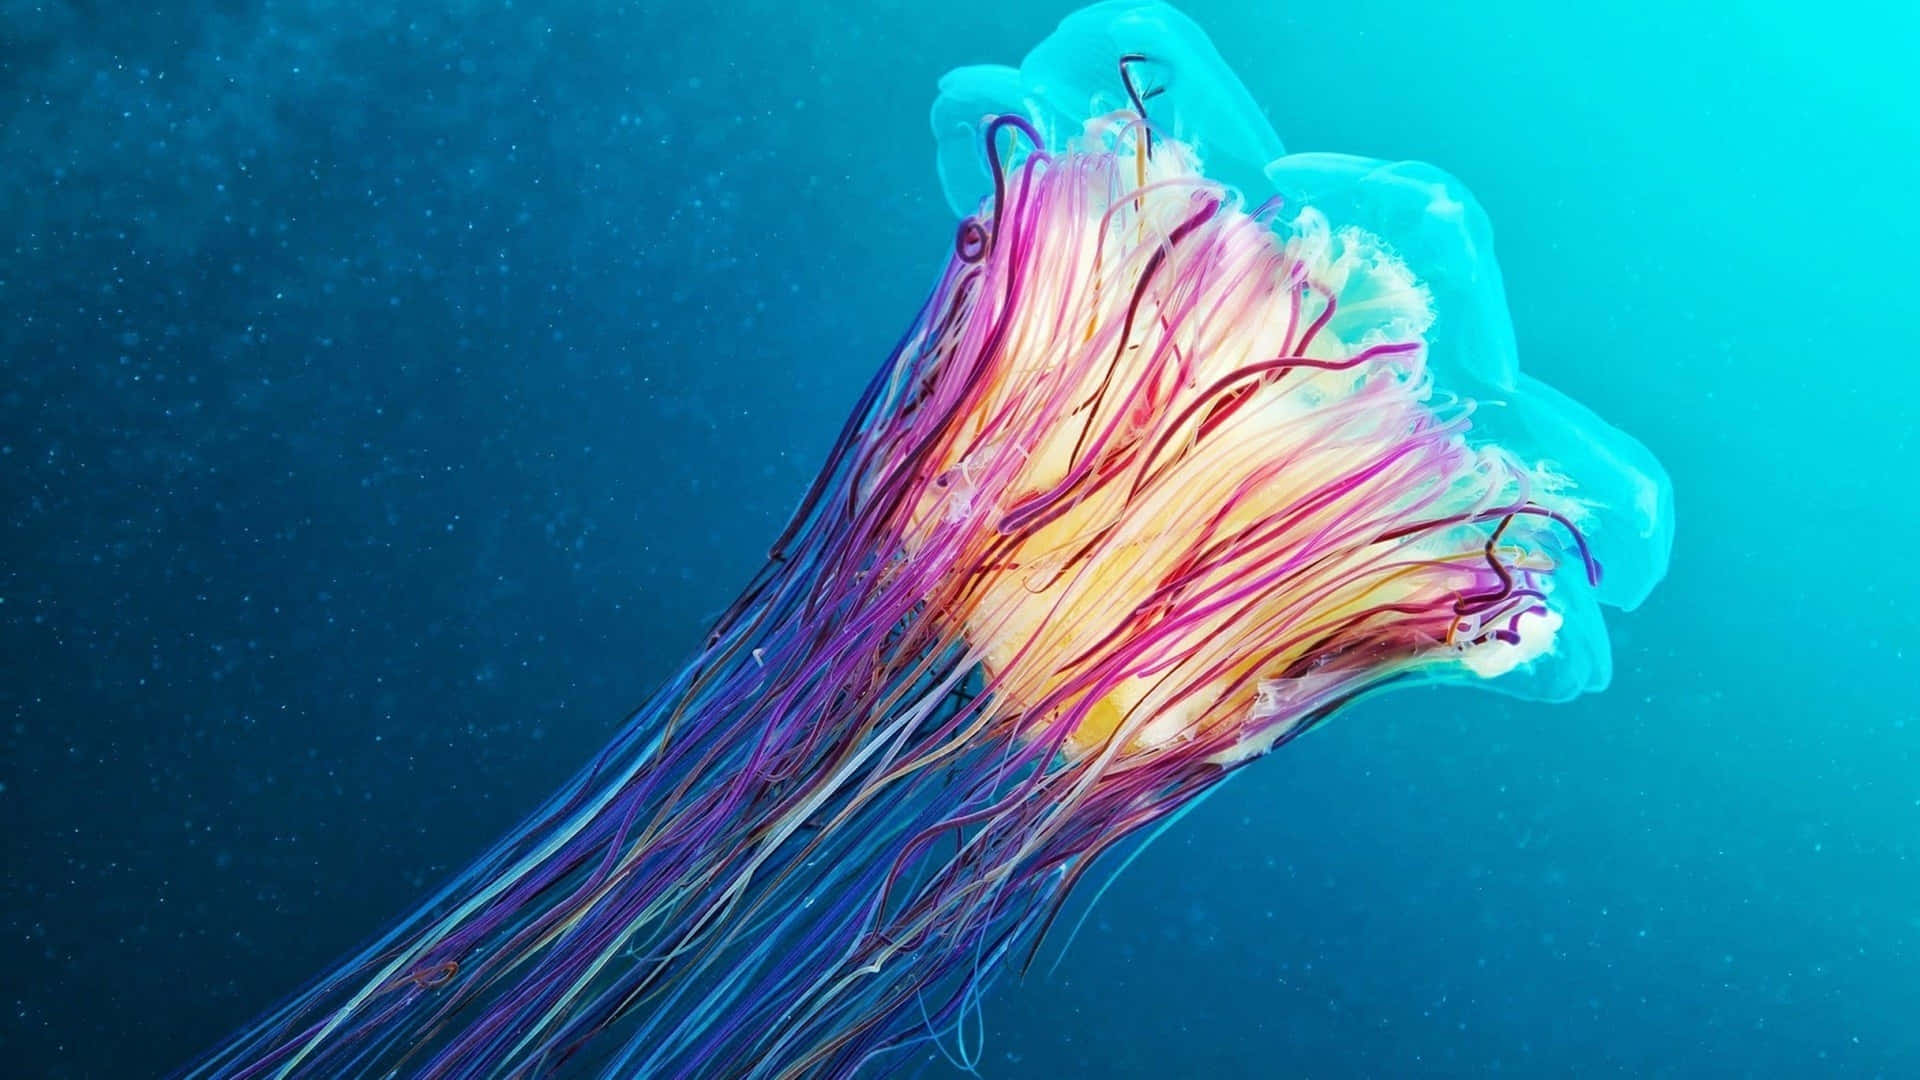 The Vibrant colours of a 4k Jellyfish" Wallpaper